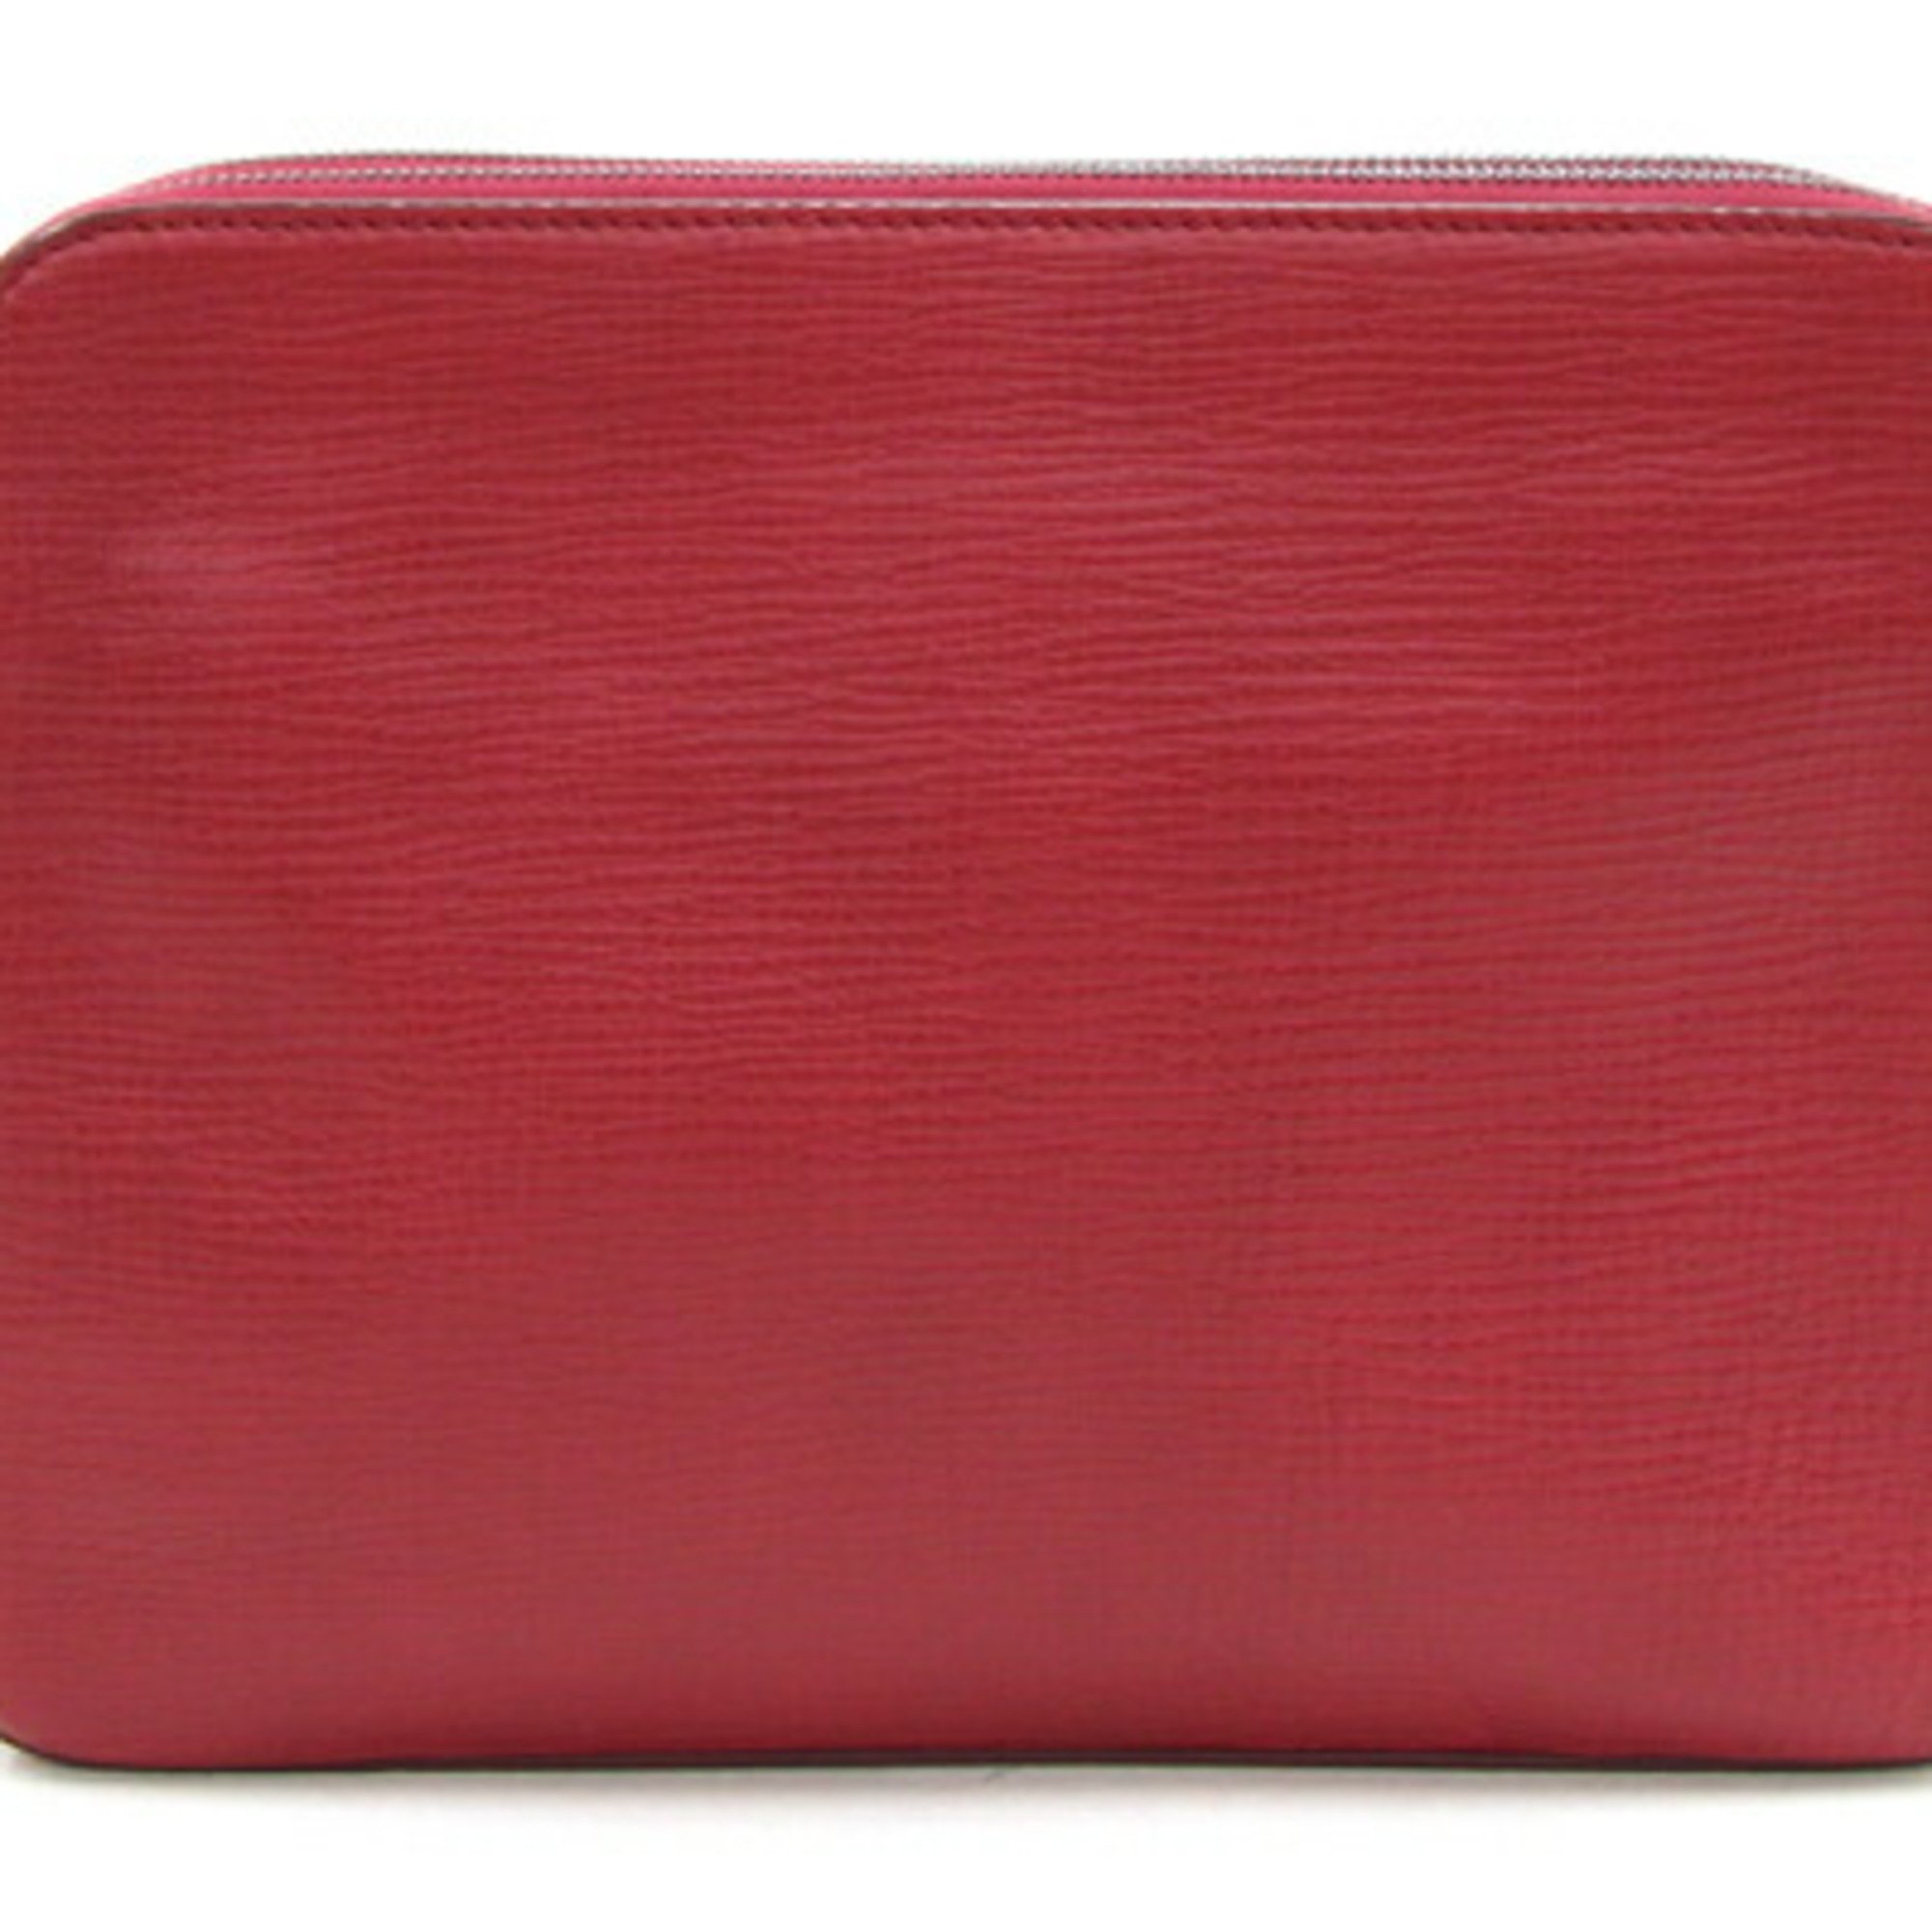 Dolce & Gabbana Clutch Bag Red Leather Double Second Pouch Men's Women's DOLCE&GABBANA